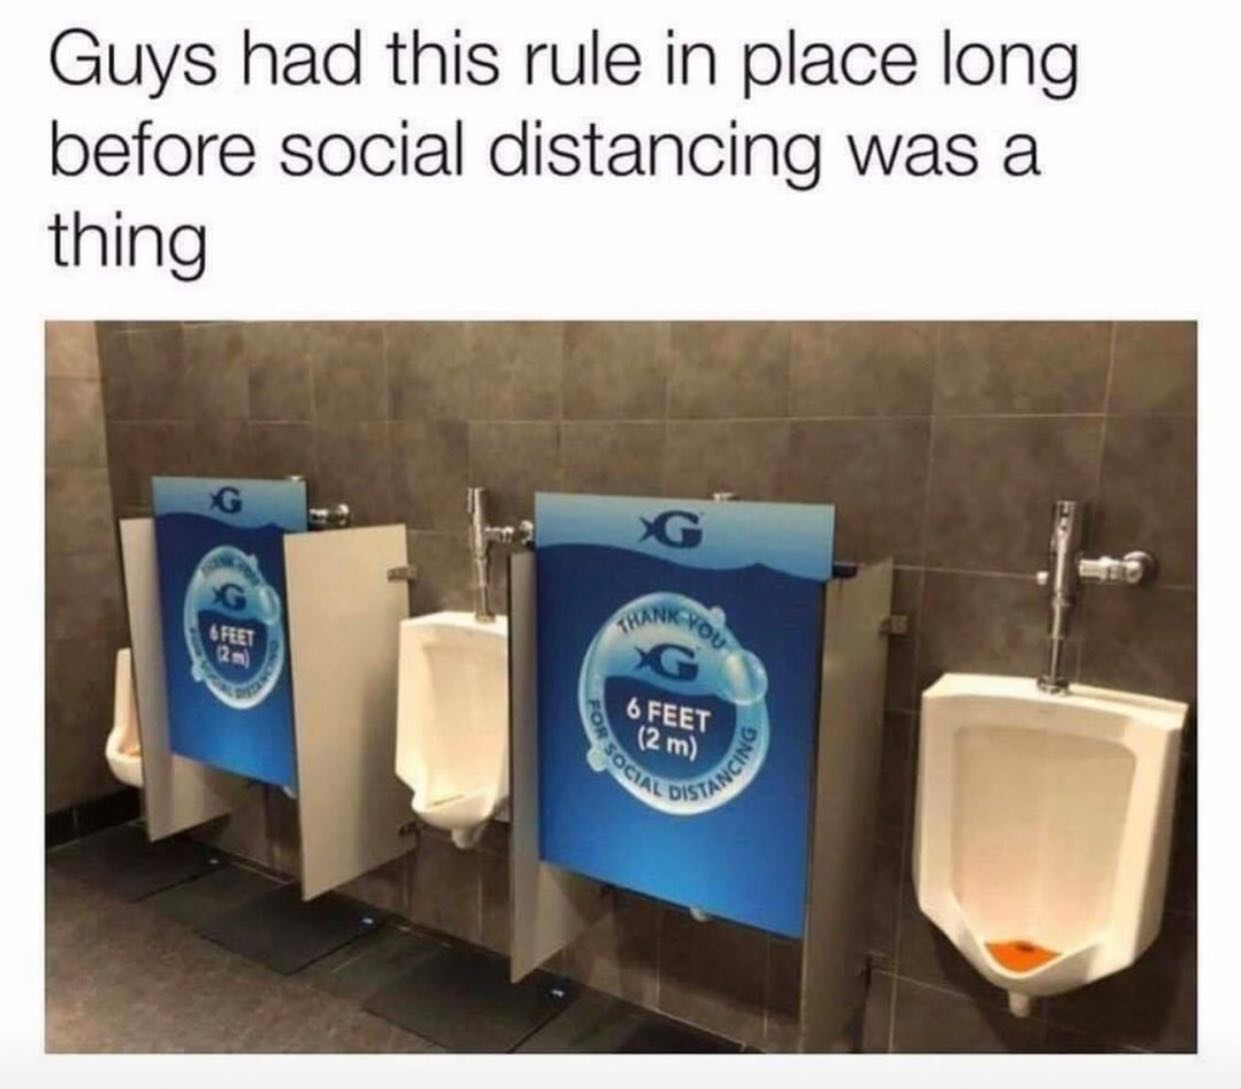 dank memes - urinal social distancing meme - Guys had this rule in place long before social distancing was a thing Thank You 6 Feet For 6 Feet 2 m Social